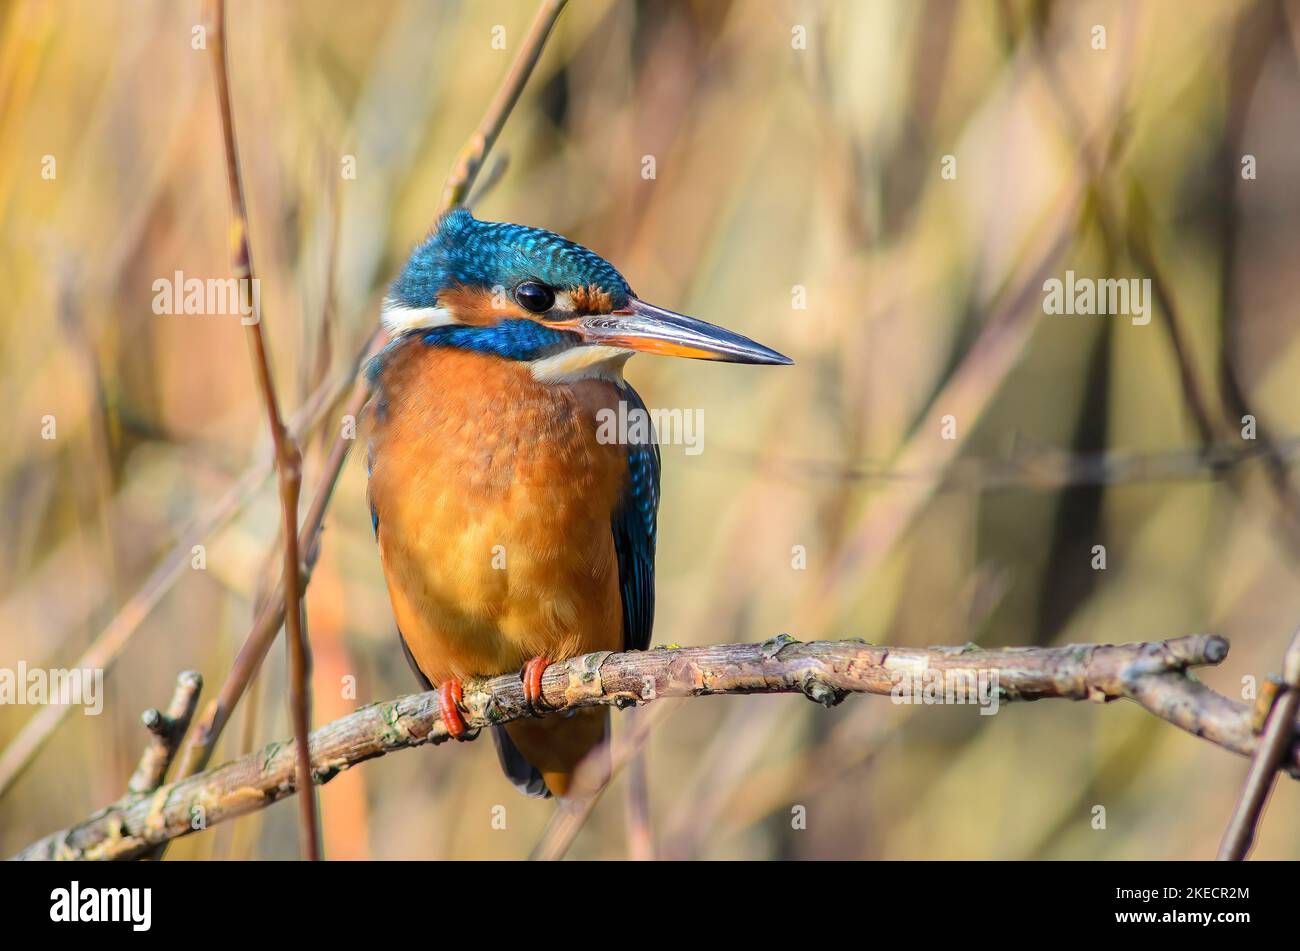 Female Kingfisher, Alcedo atthis, perched on a tree branch, blurred background Stock Photo